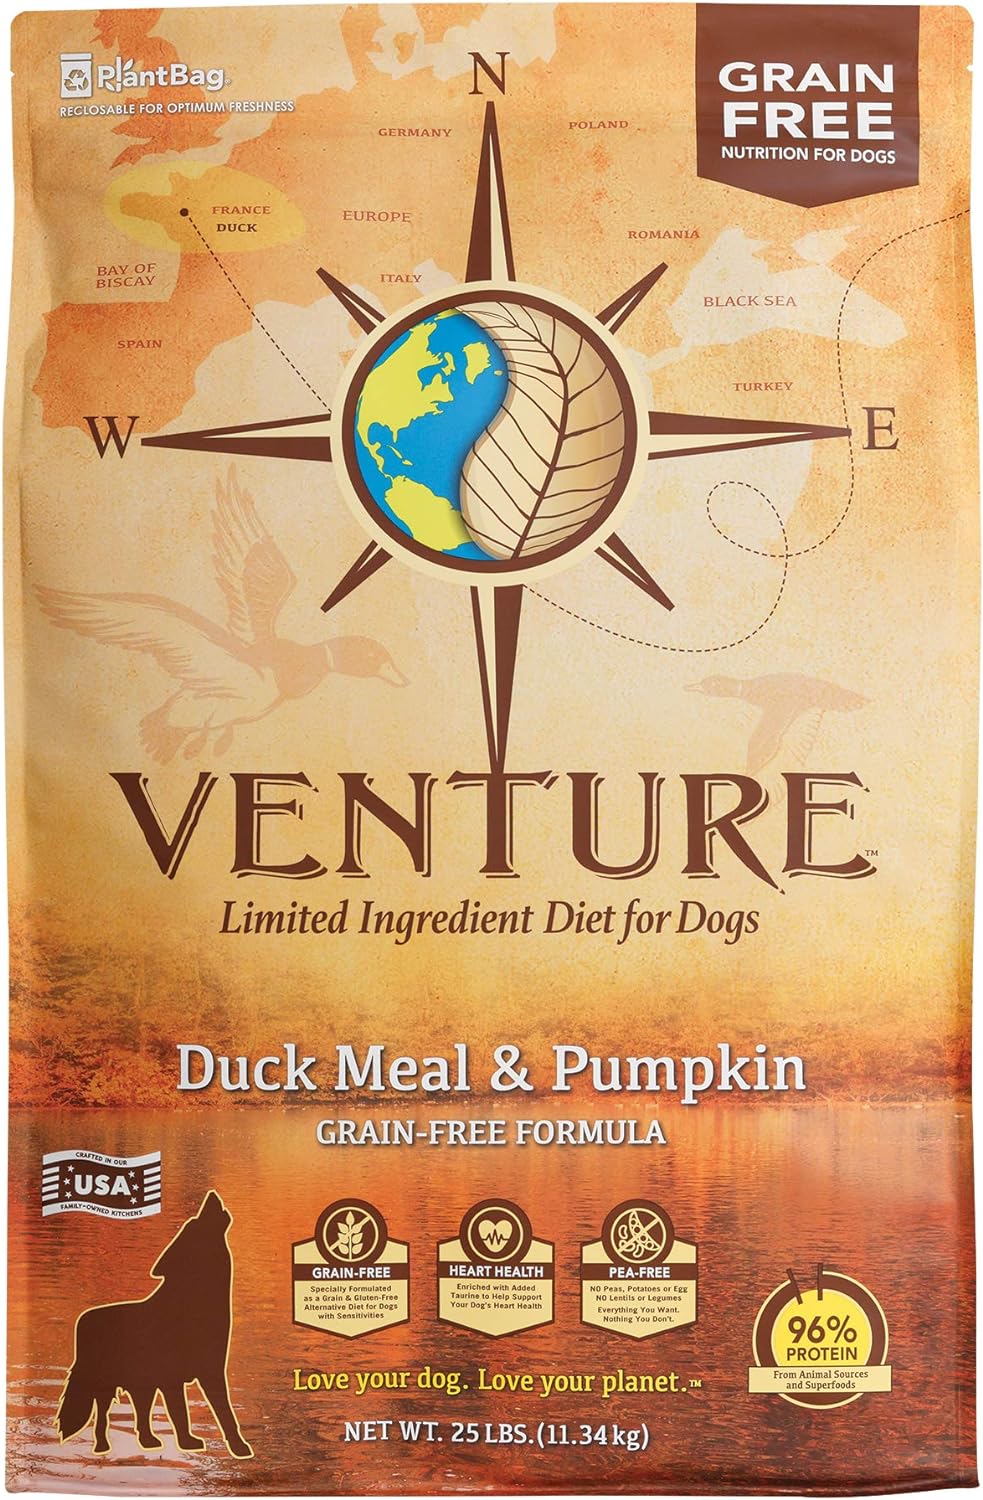 Earthborn Holistic Venture Limited Ingredient Grain-Free Duck Meal & Pumpkin Dry Dog Food – Gallery Image 1